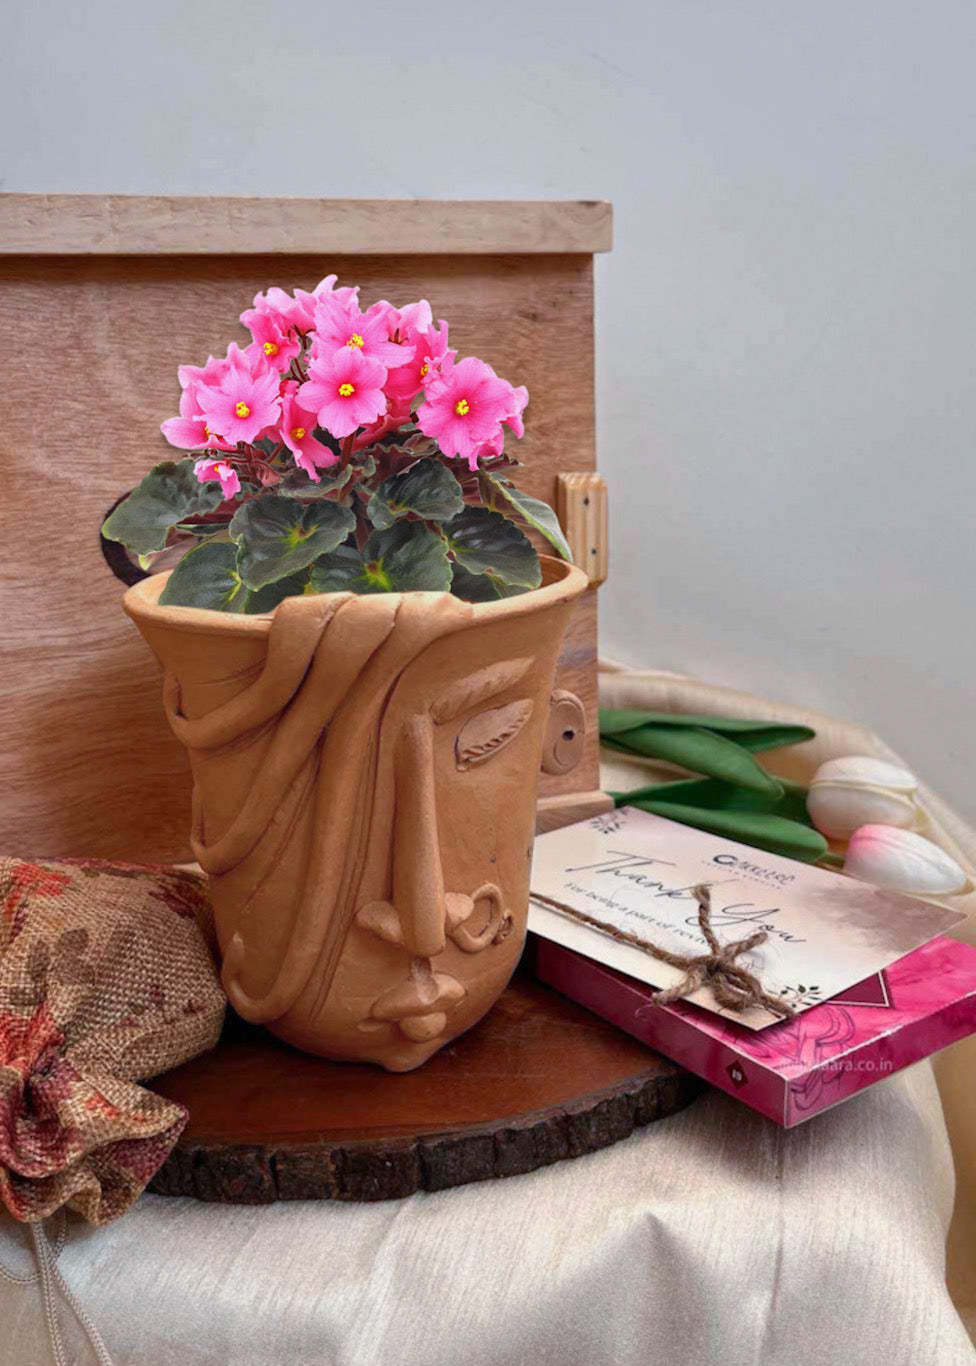 A woman shaped white planter is decorated with pink flower and is kept on the table along with chocolates and the akkaara gicting box